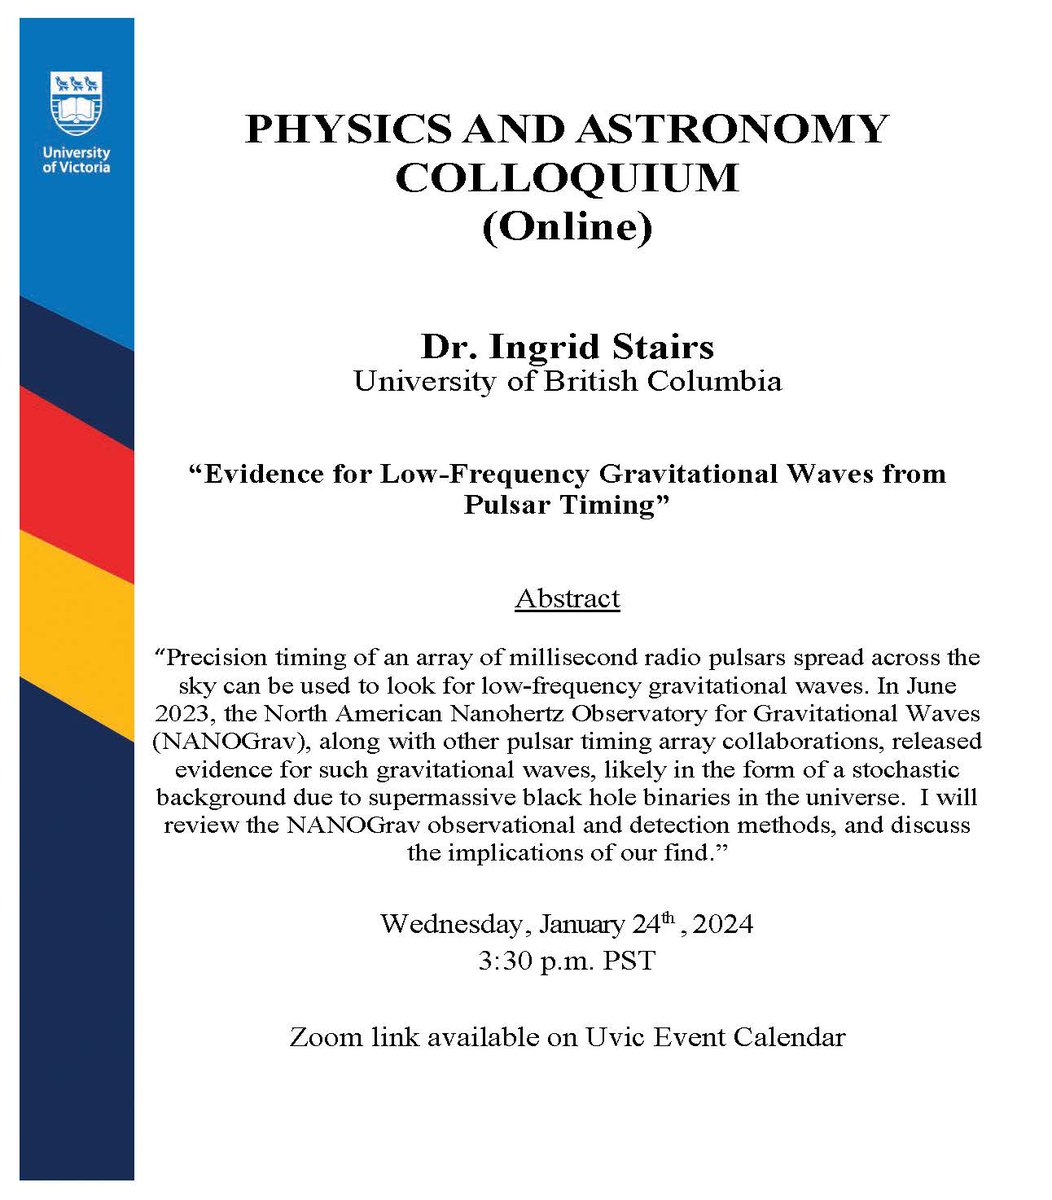 COLLOQUIUM (Online): Dr. Ingrid Stairs, University of British Columbia, will give an online colloquium on Wednesday January 24th at 3:30pm PST. For more information: events.uvic.ca/physics/event/…